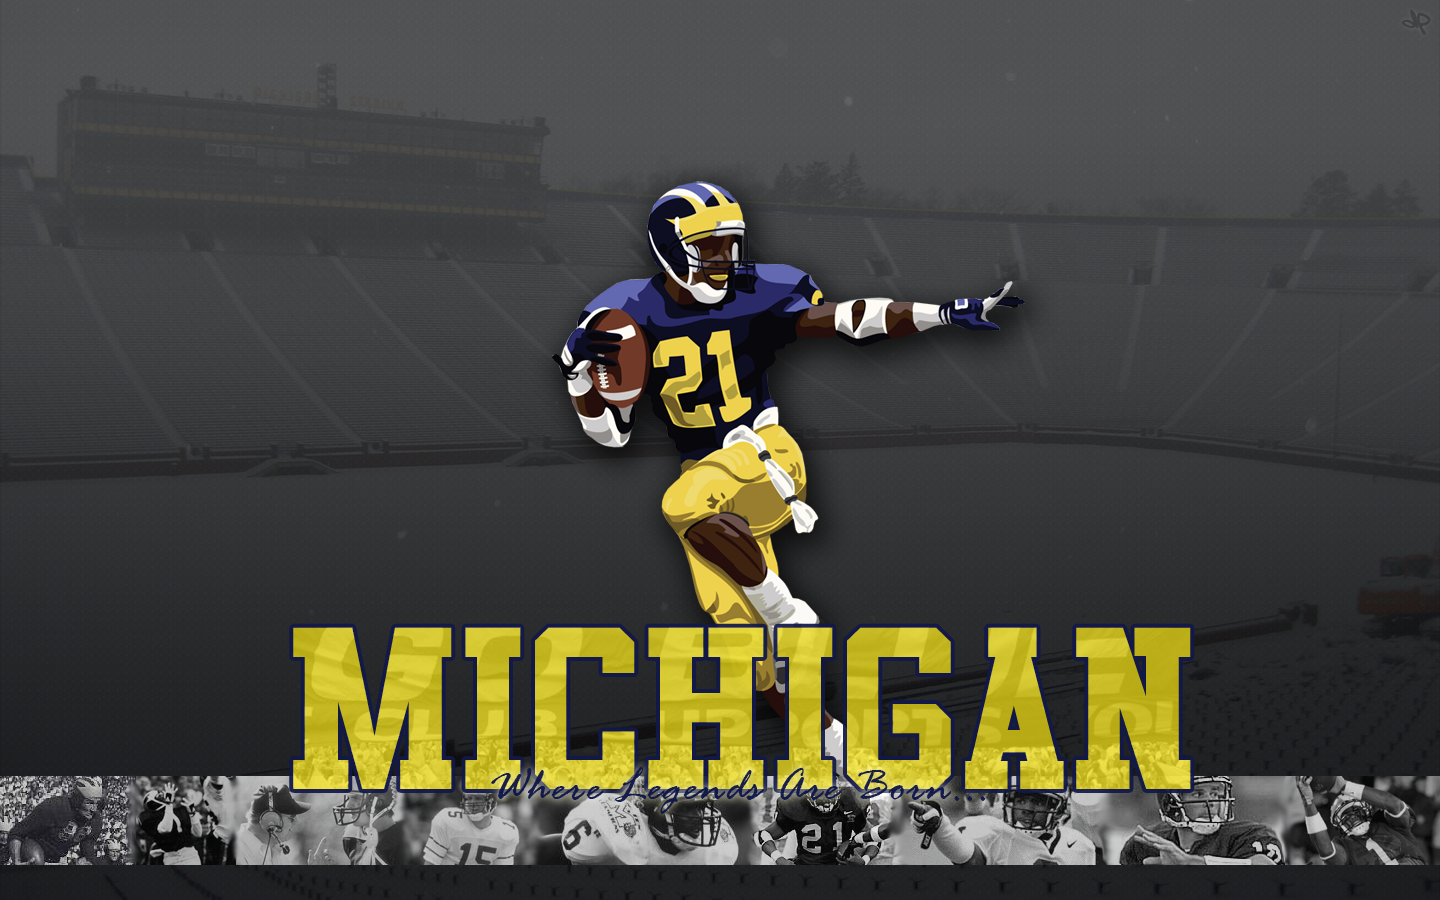 Michigan Desktop Wallpaper? Does anyone have any awesome wallpapers they'd 